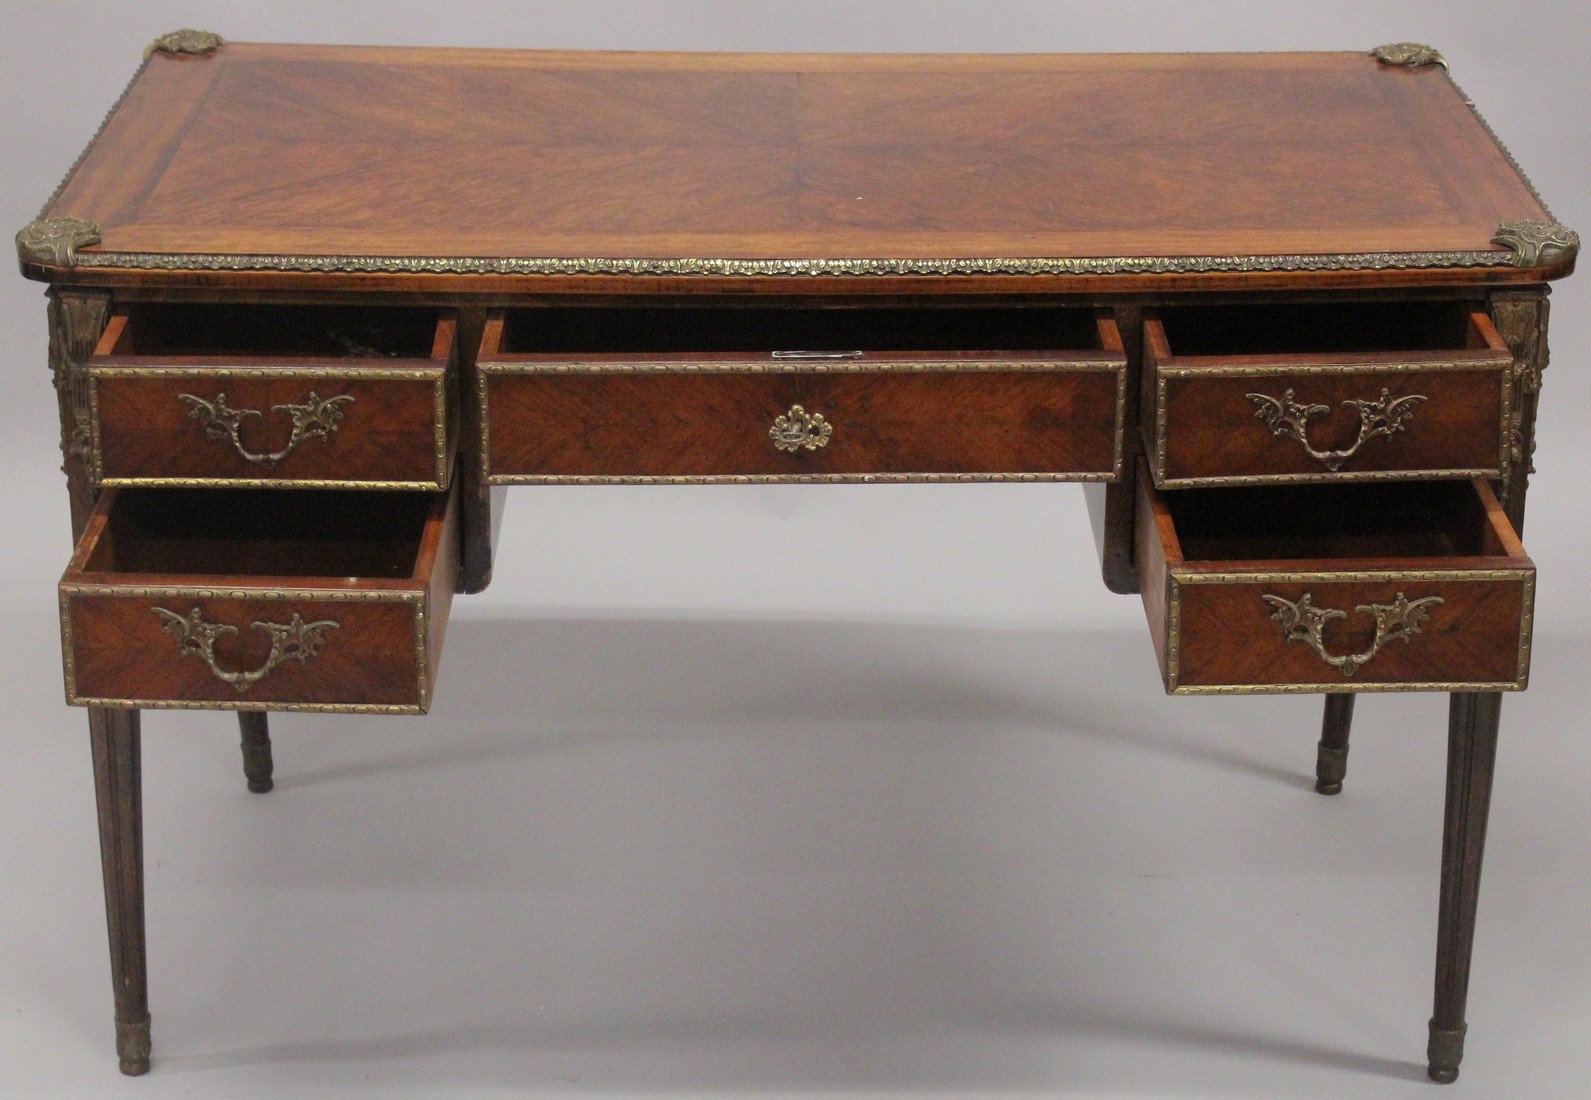 A LOUIS XVITH DESIGN WRITING TABLE with wooden top, five drawers on turned legs with ormolu - Image 6 of 7